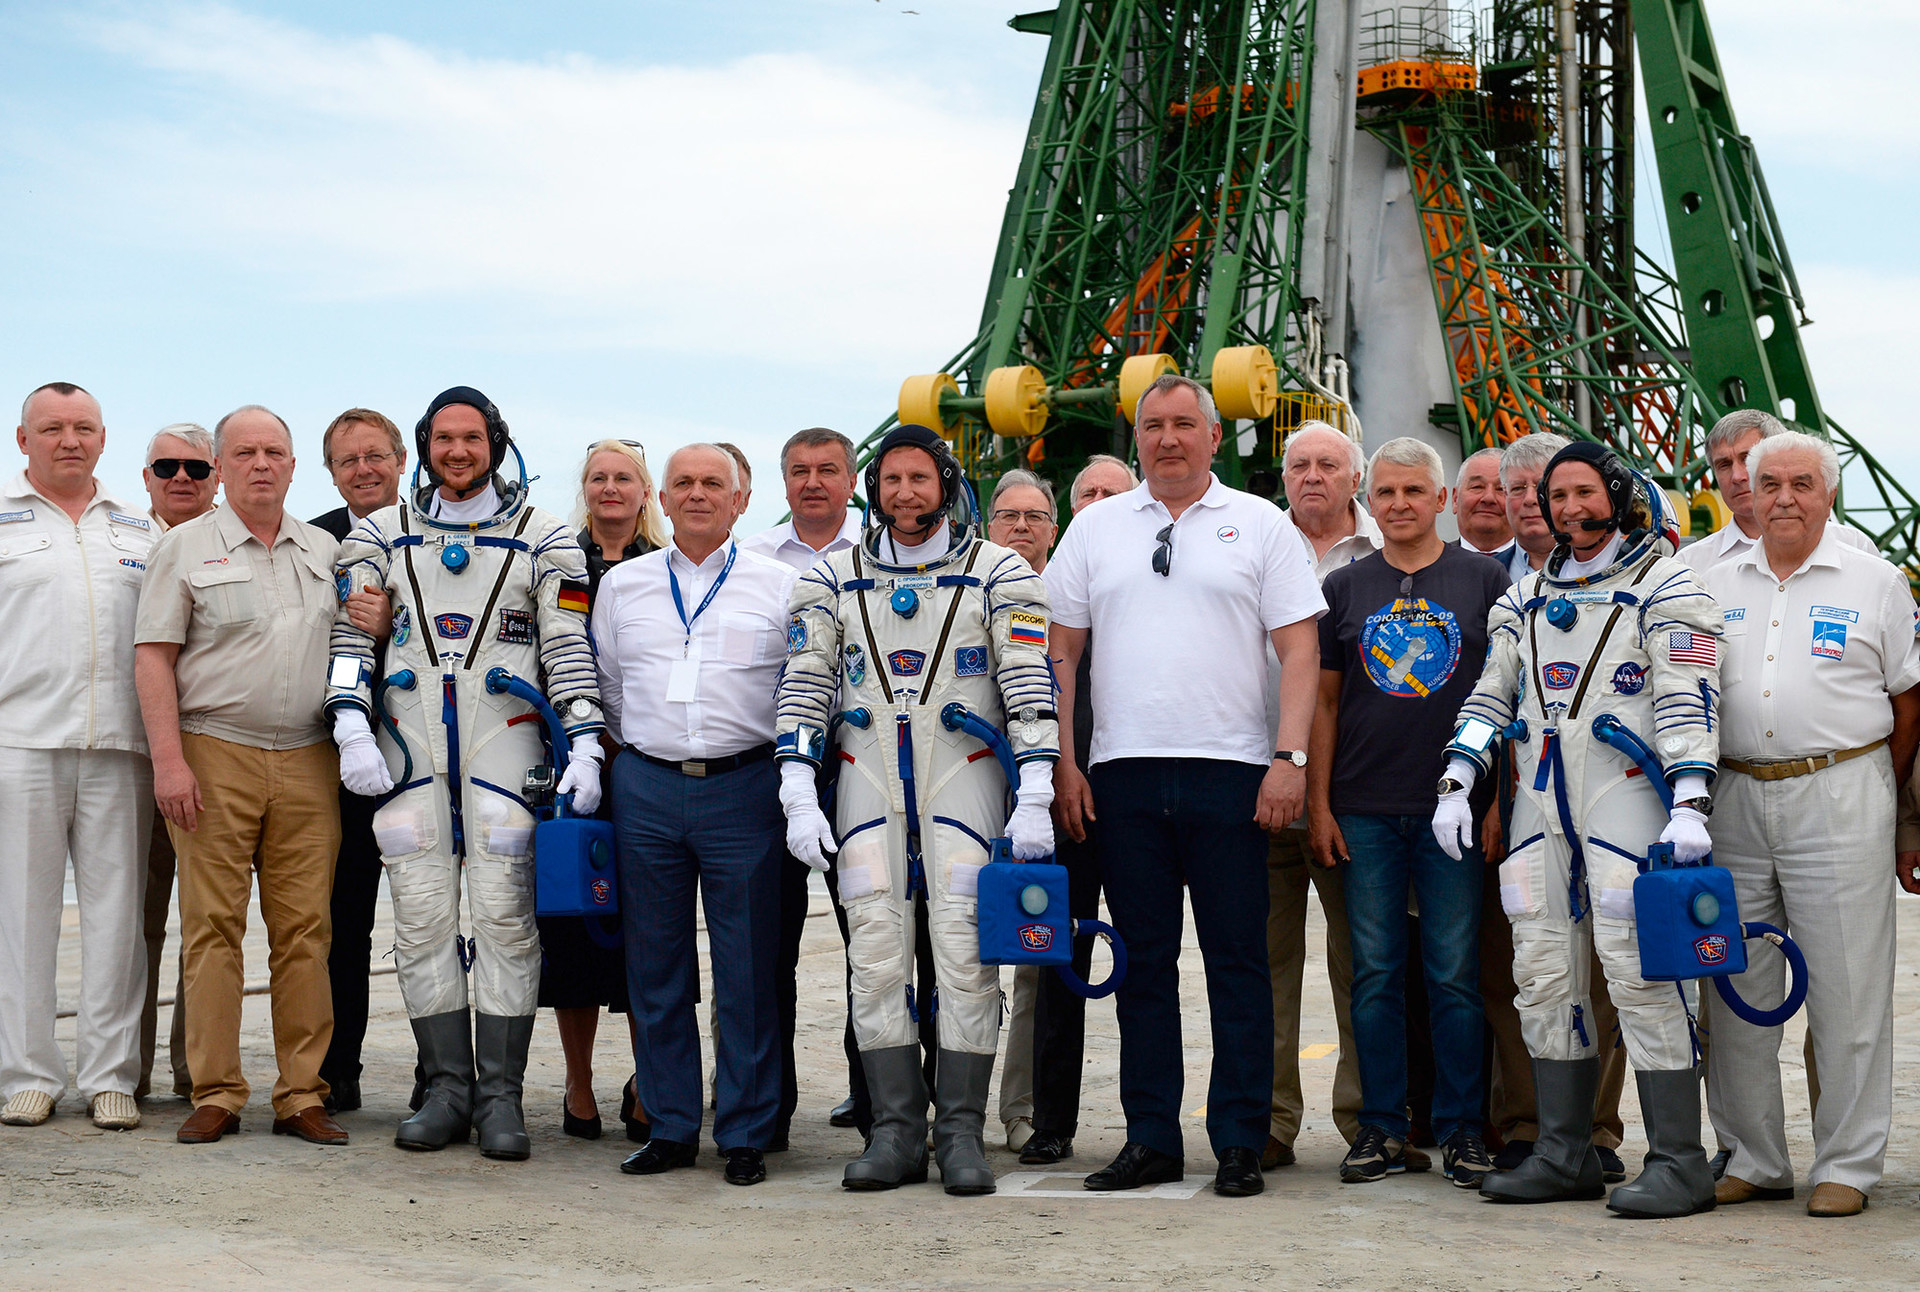 Roscosmos Head Dmitry Rogozin and members of ISS Expedition 56/57 crew pose for a group photo before the launch of the Soyuz-FG launch vehicle with the Soyuz MS-09 manned spacecraft from the First Gagaringky Launch Pad at Baikonur, June 2018